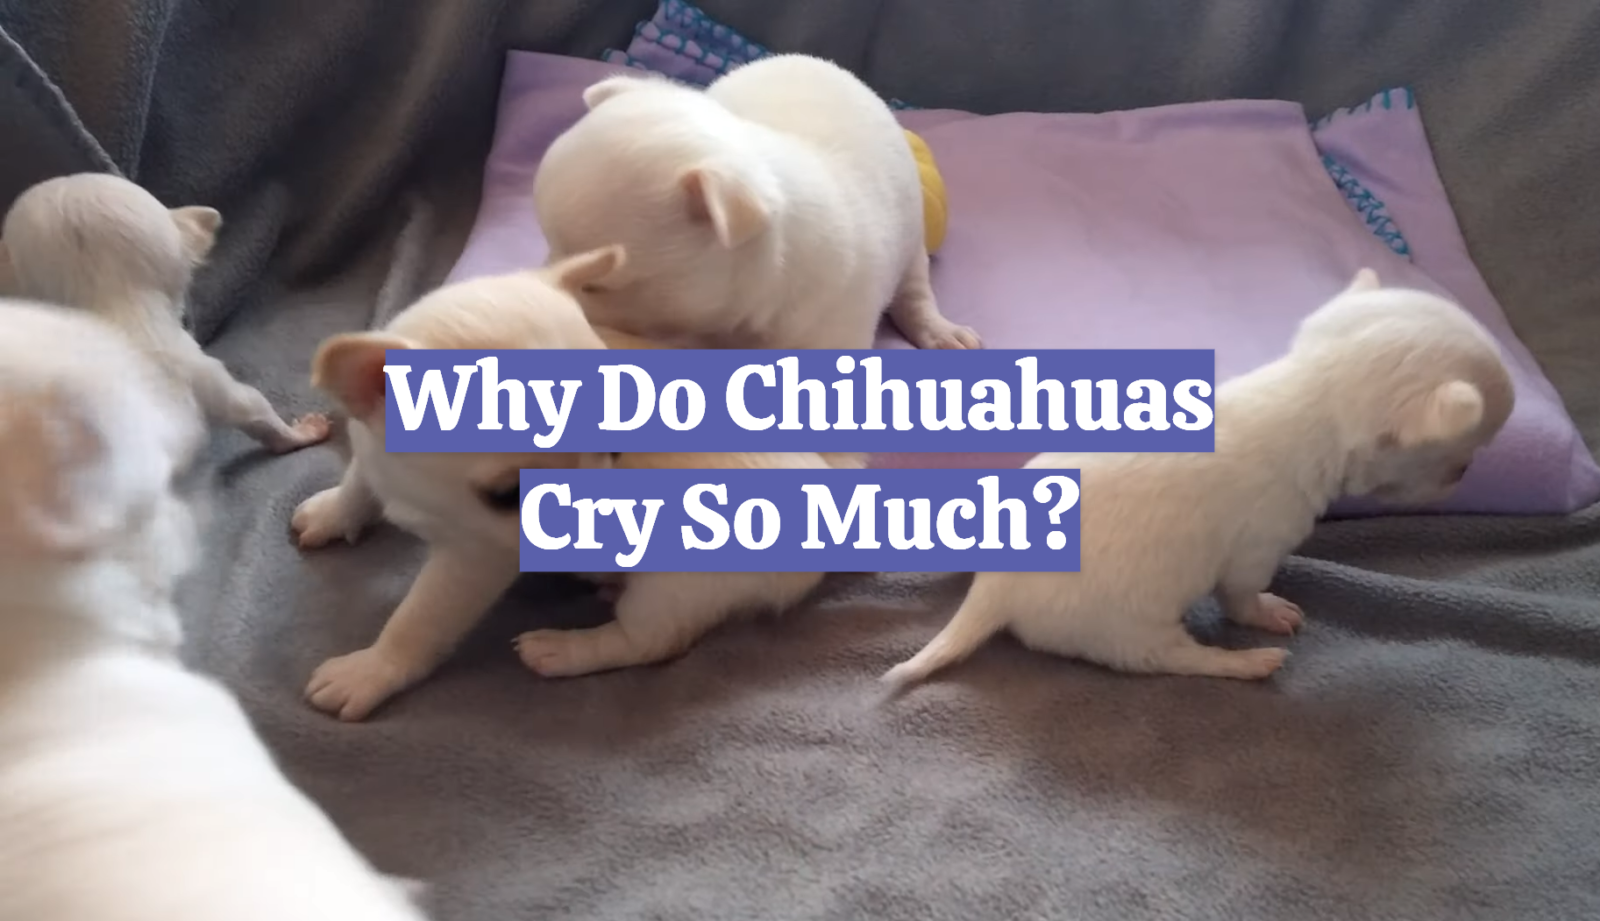 Why Do Chihuahuas Cry So Much?